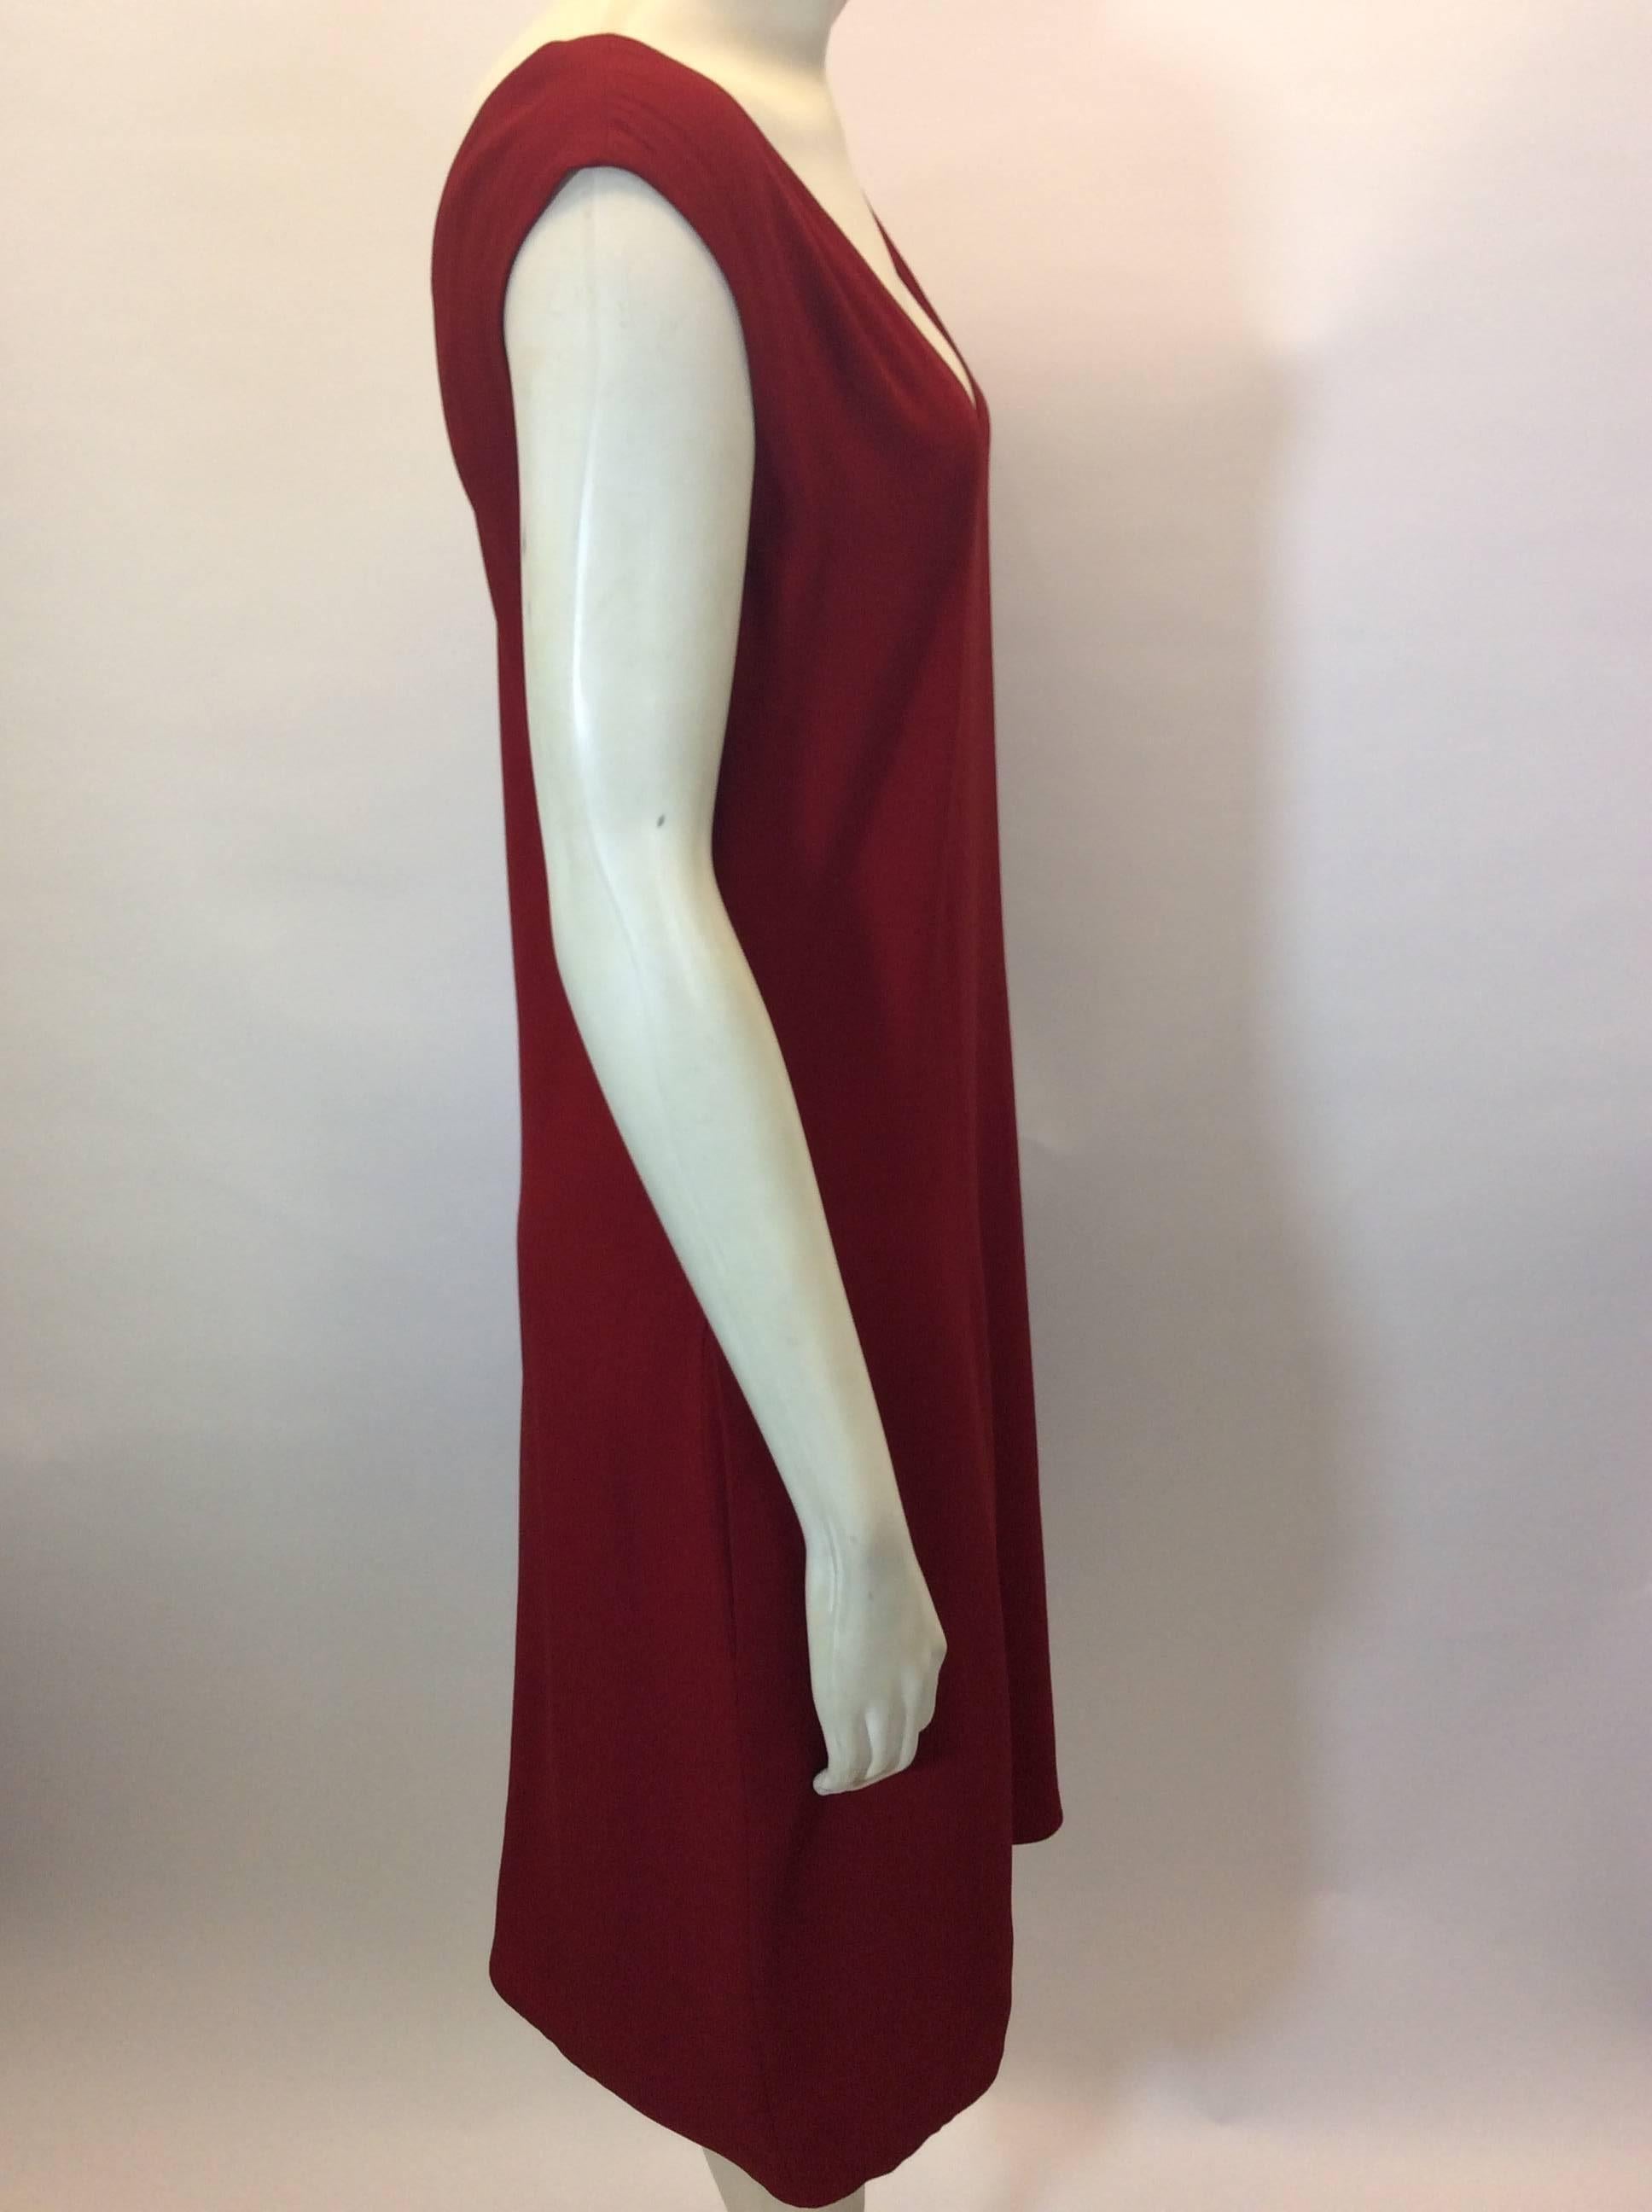 Red V-Neck Sheath Dress
Pullover fit
Knee length
Features two side seam pockets
Size 36
58% Viscose, 47% Acetate